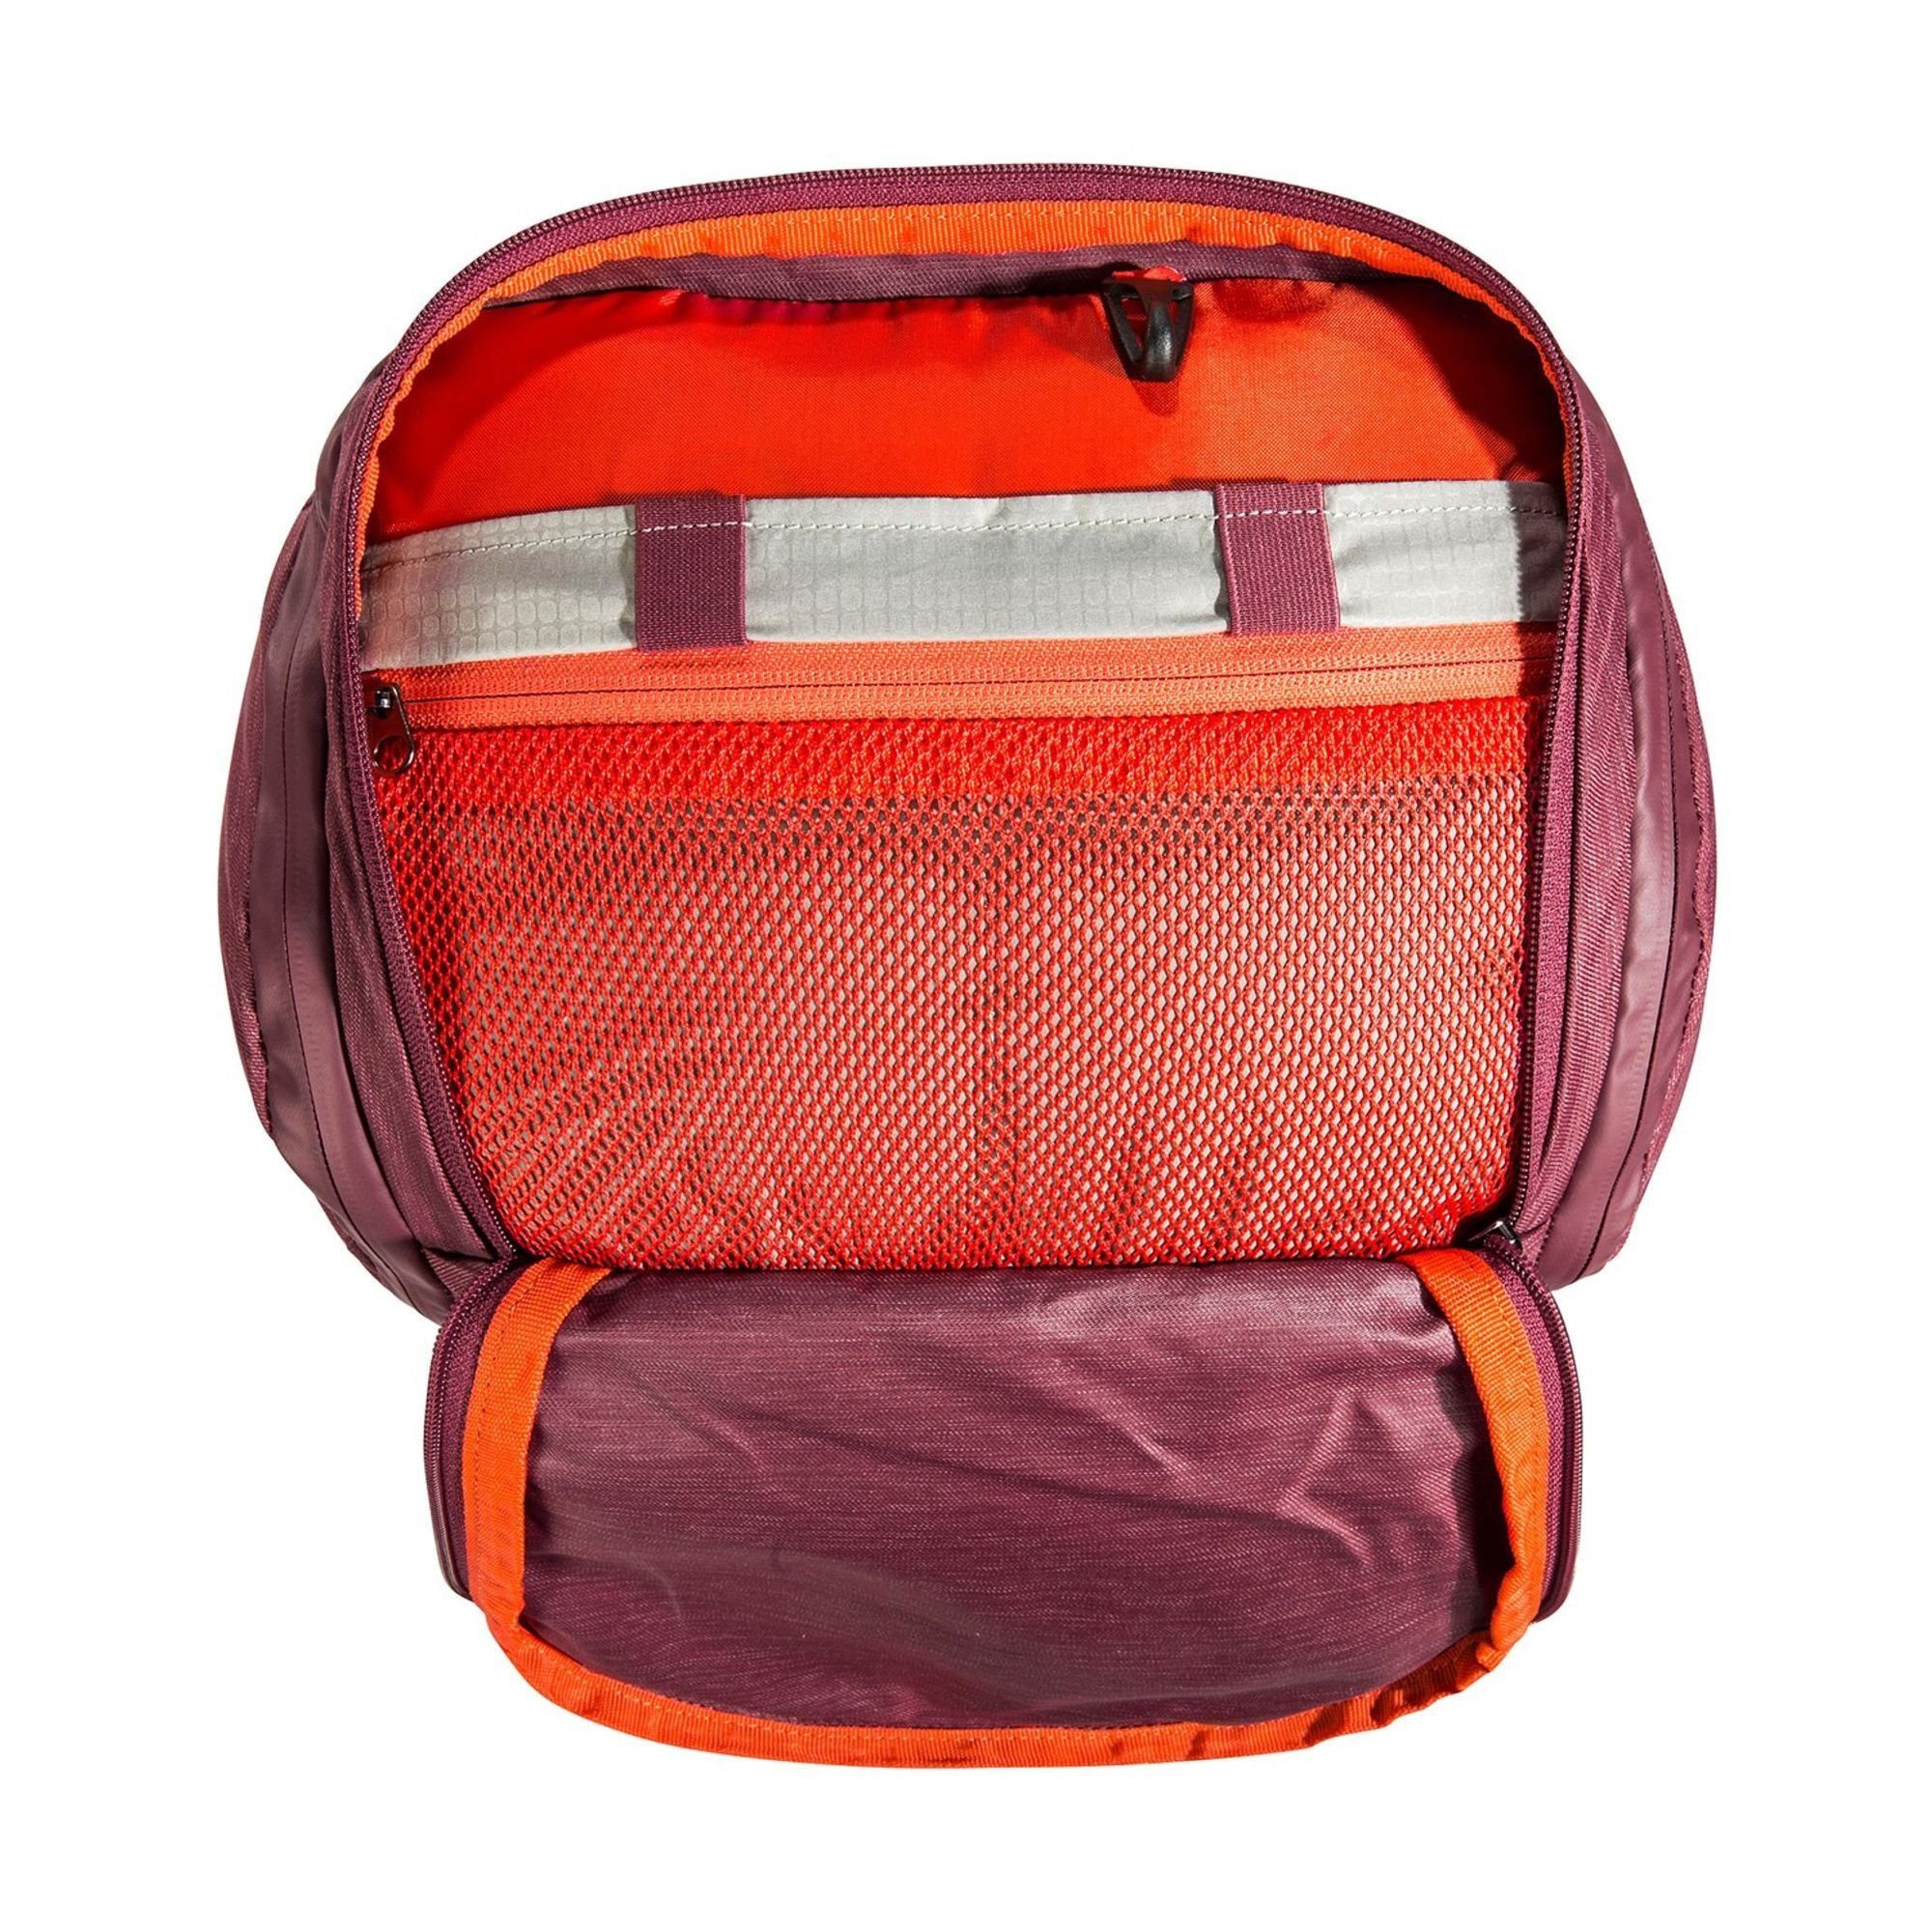 TATONKA® Daypack City Pack, bordeaux red Polyester